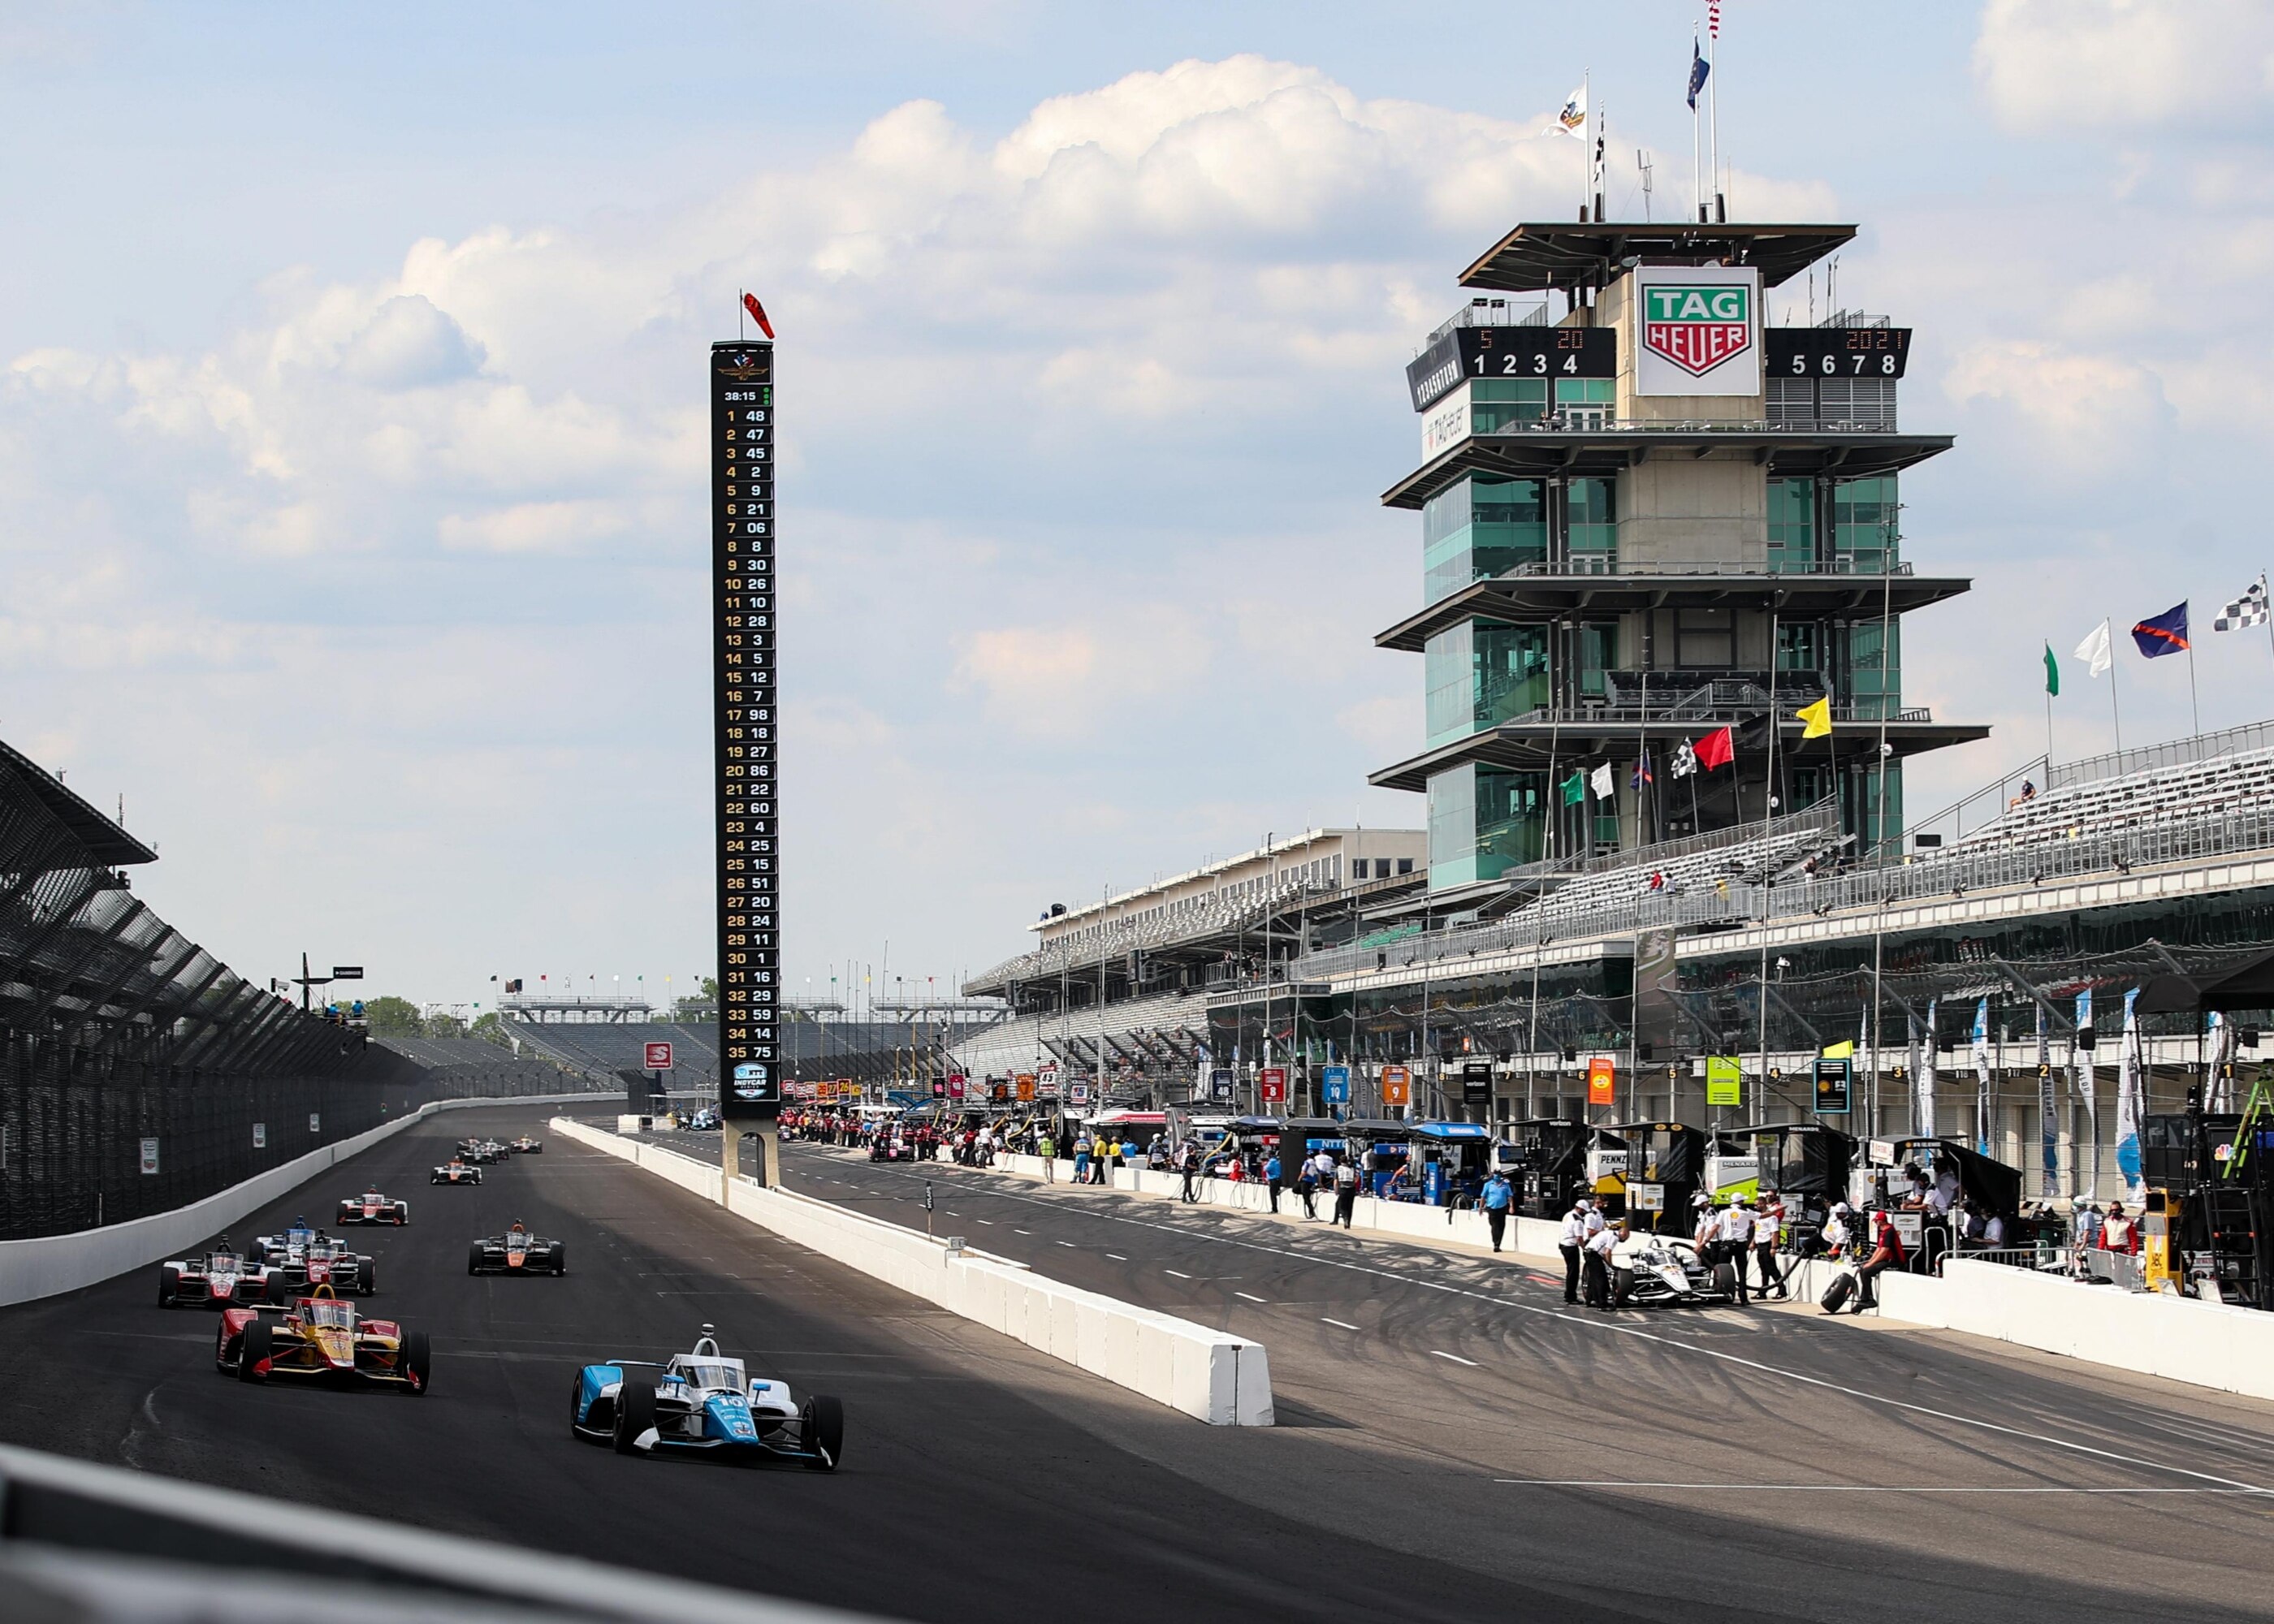 Fan experience at the Indy 500